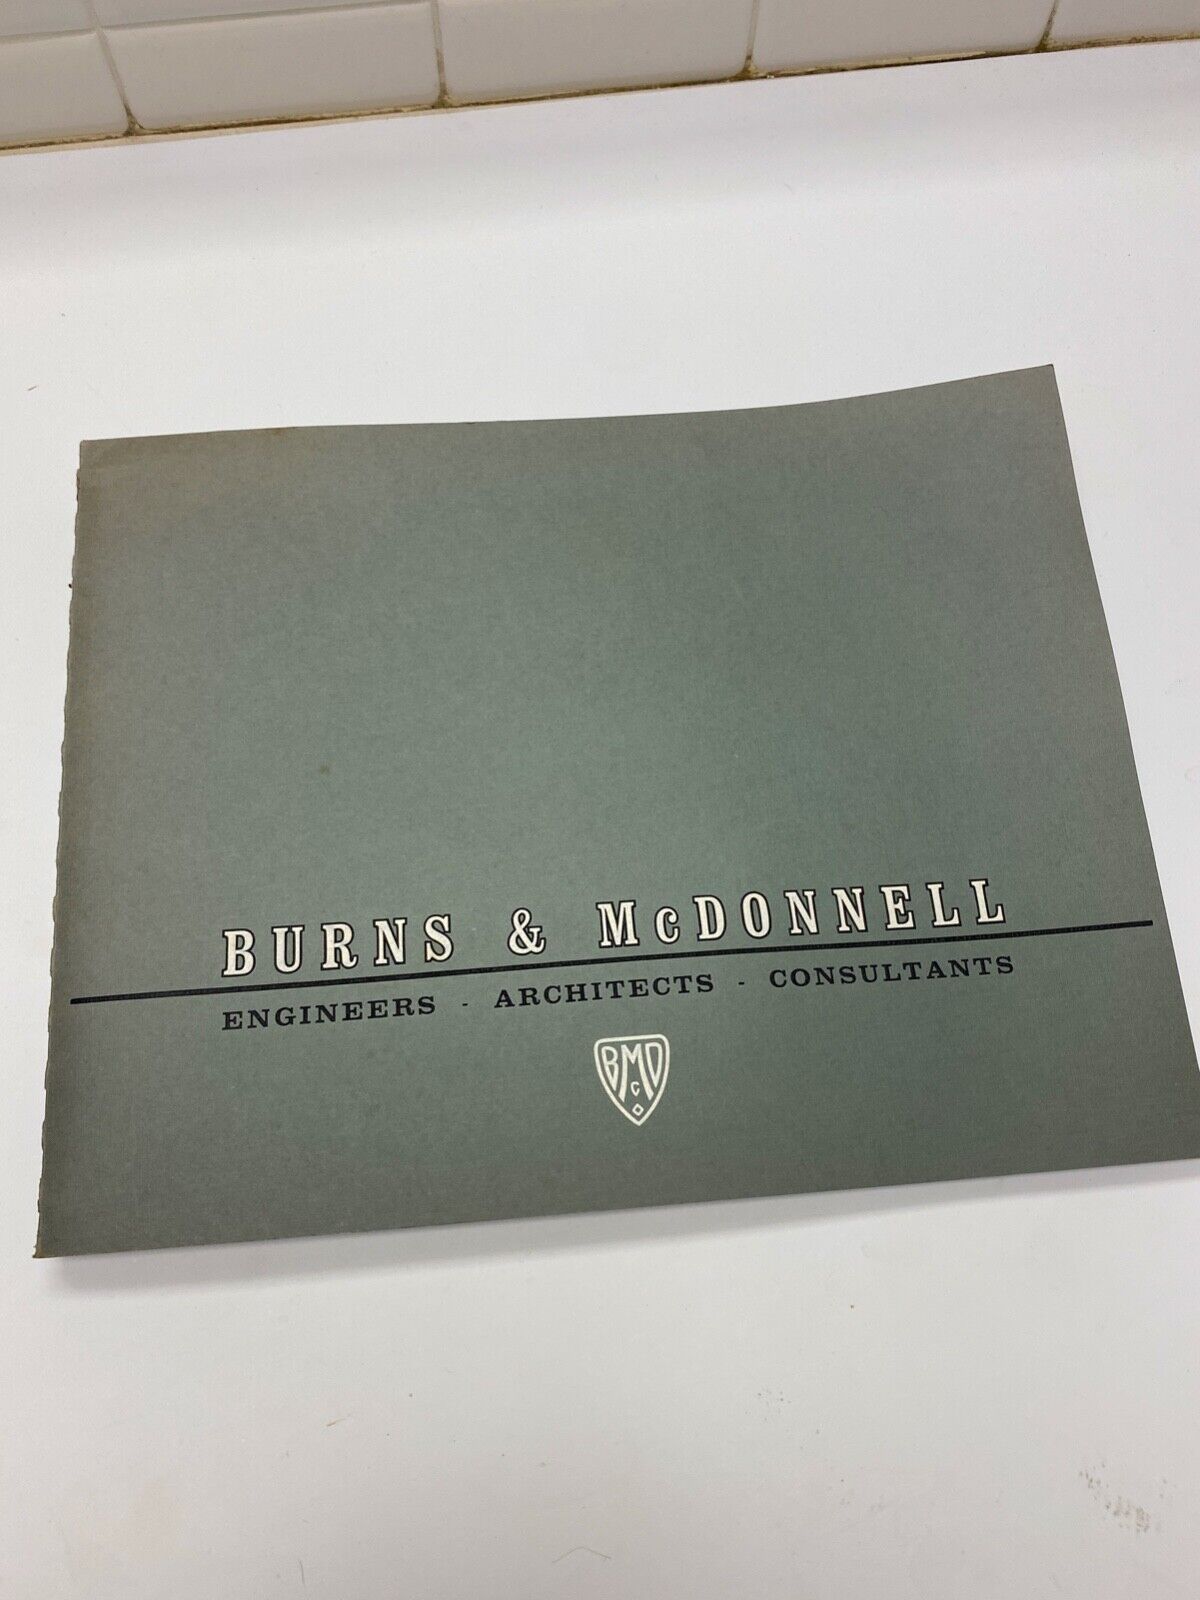 1972 Burns & McDonnell Engineers Architects Consultants Accomplishments Brochure